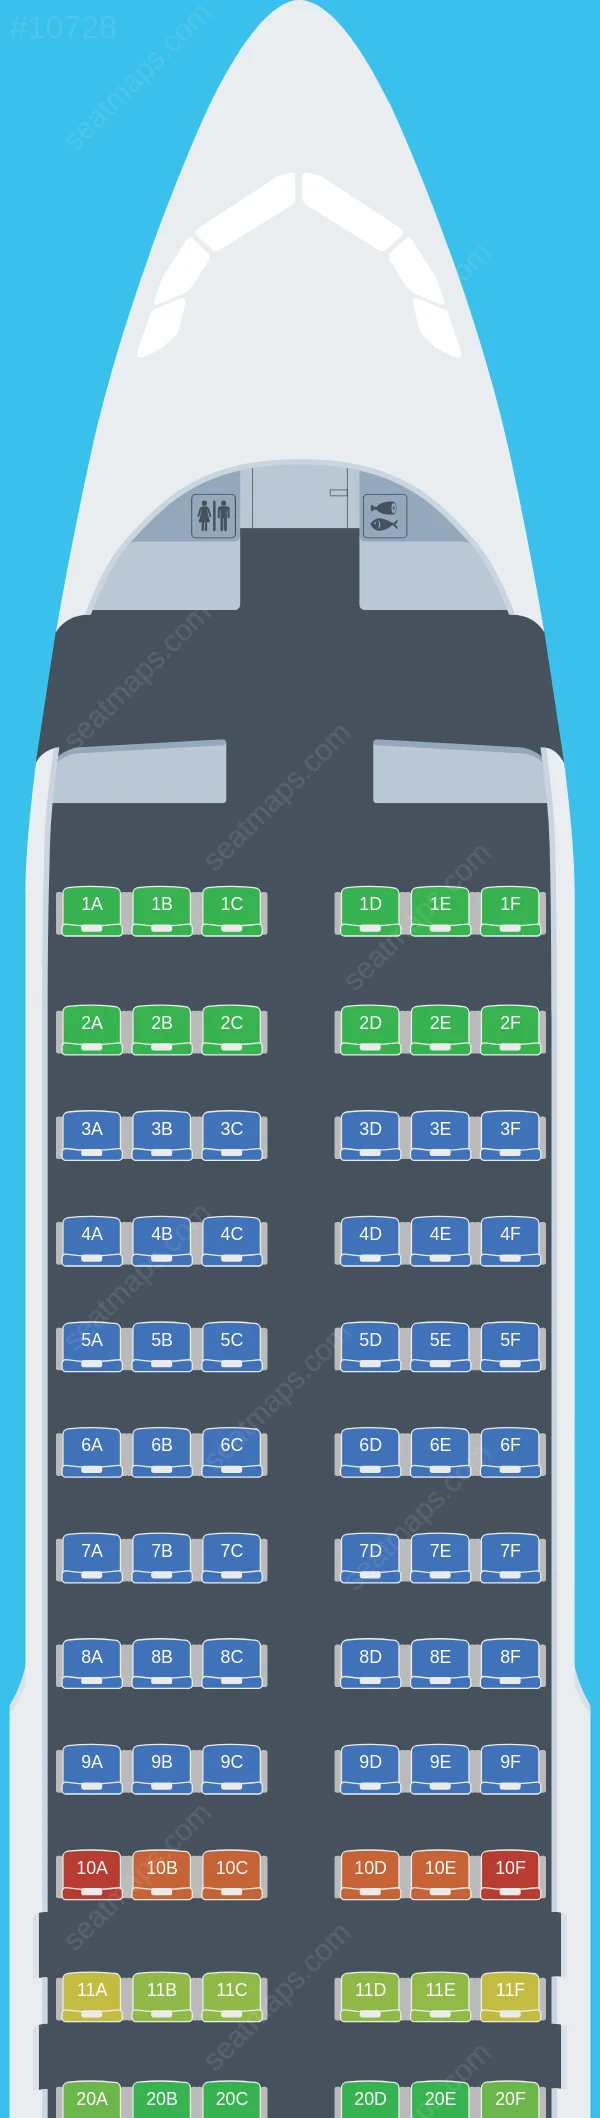 PLAY Airbus A320neo V.2 seatmap preview